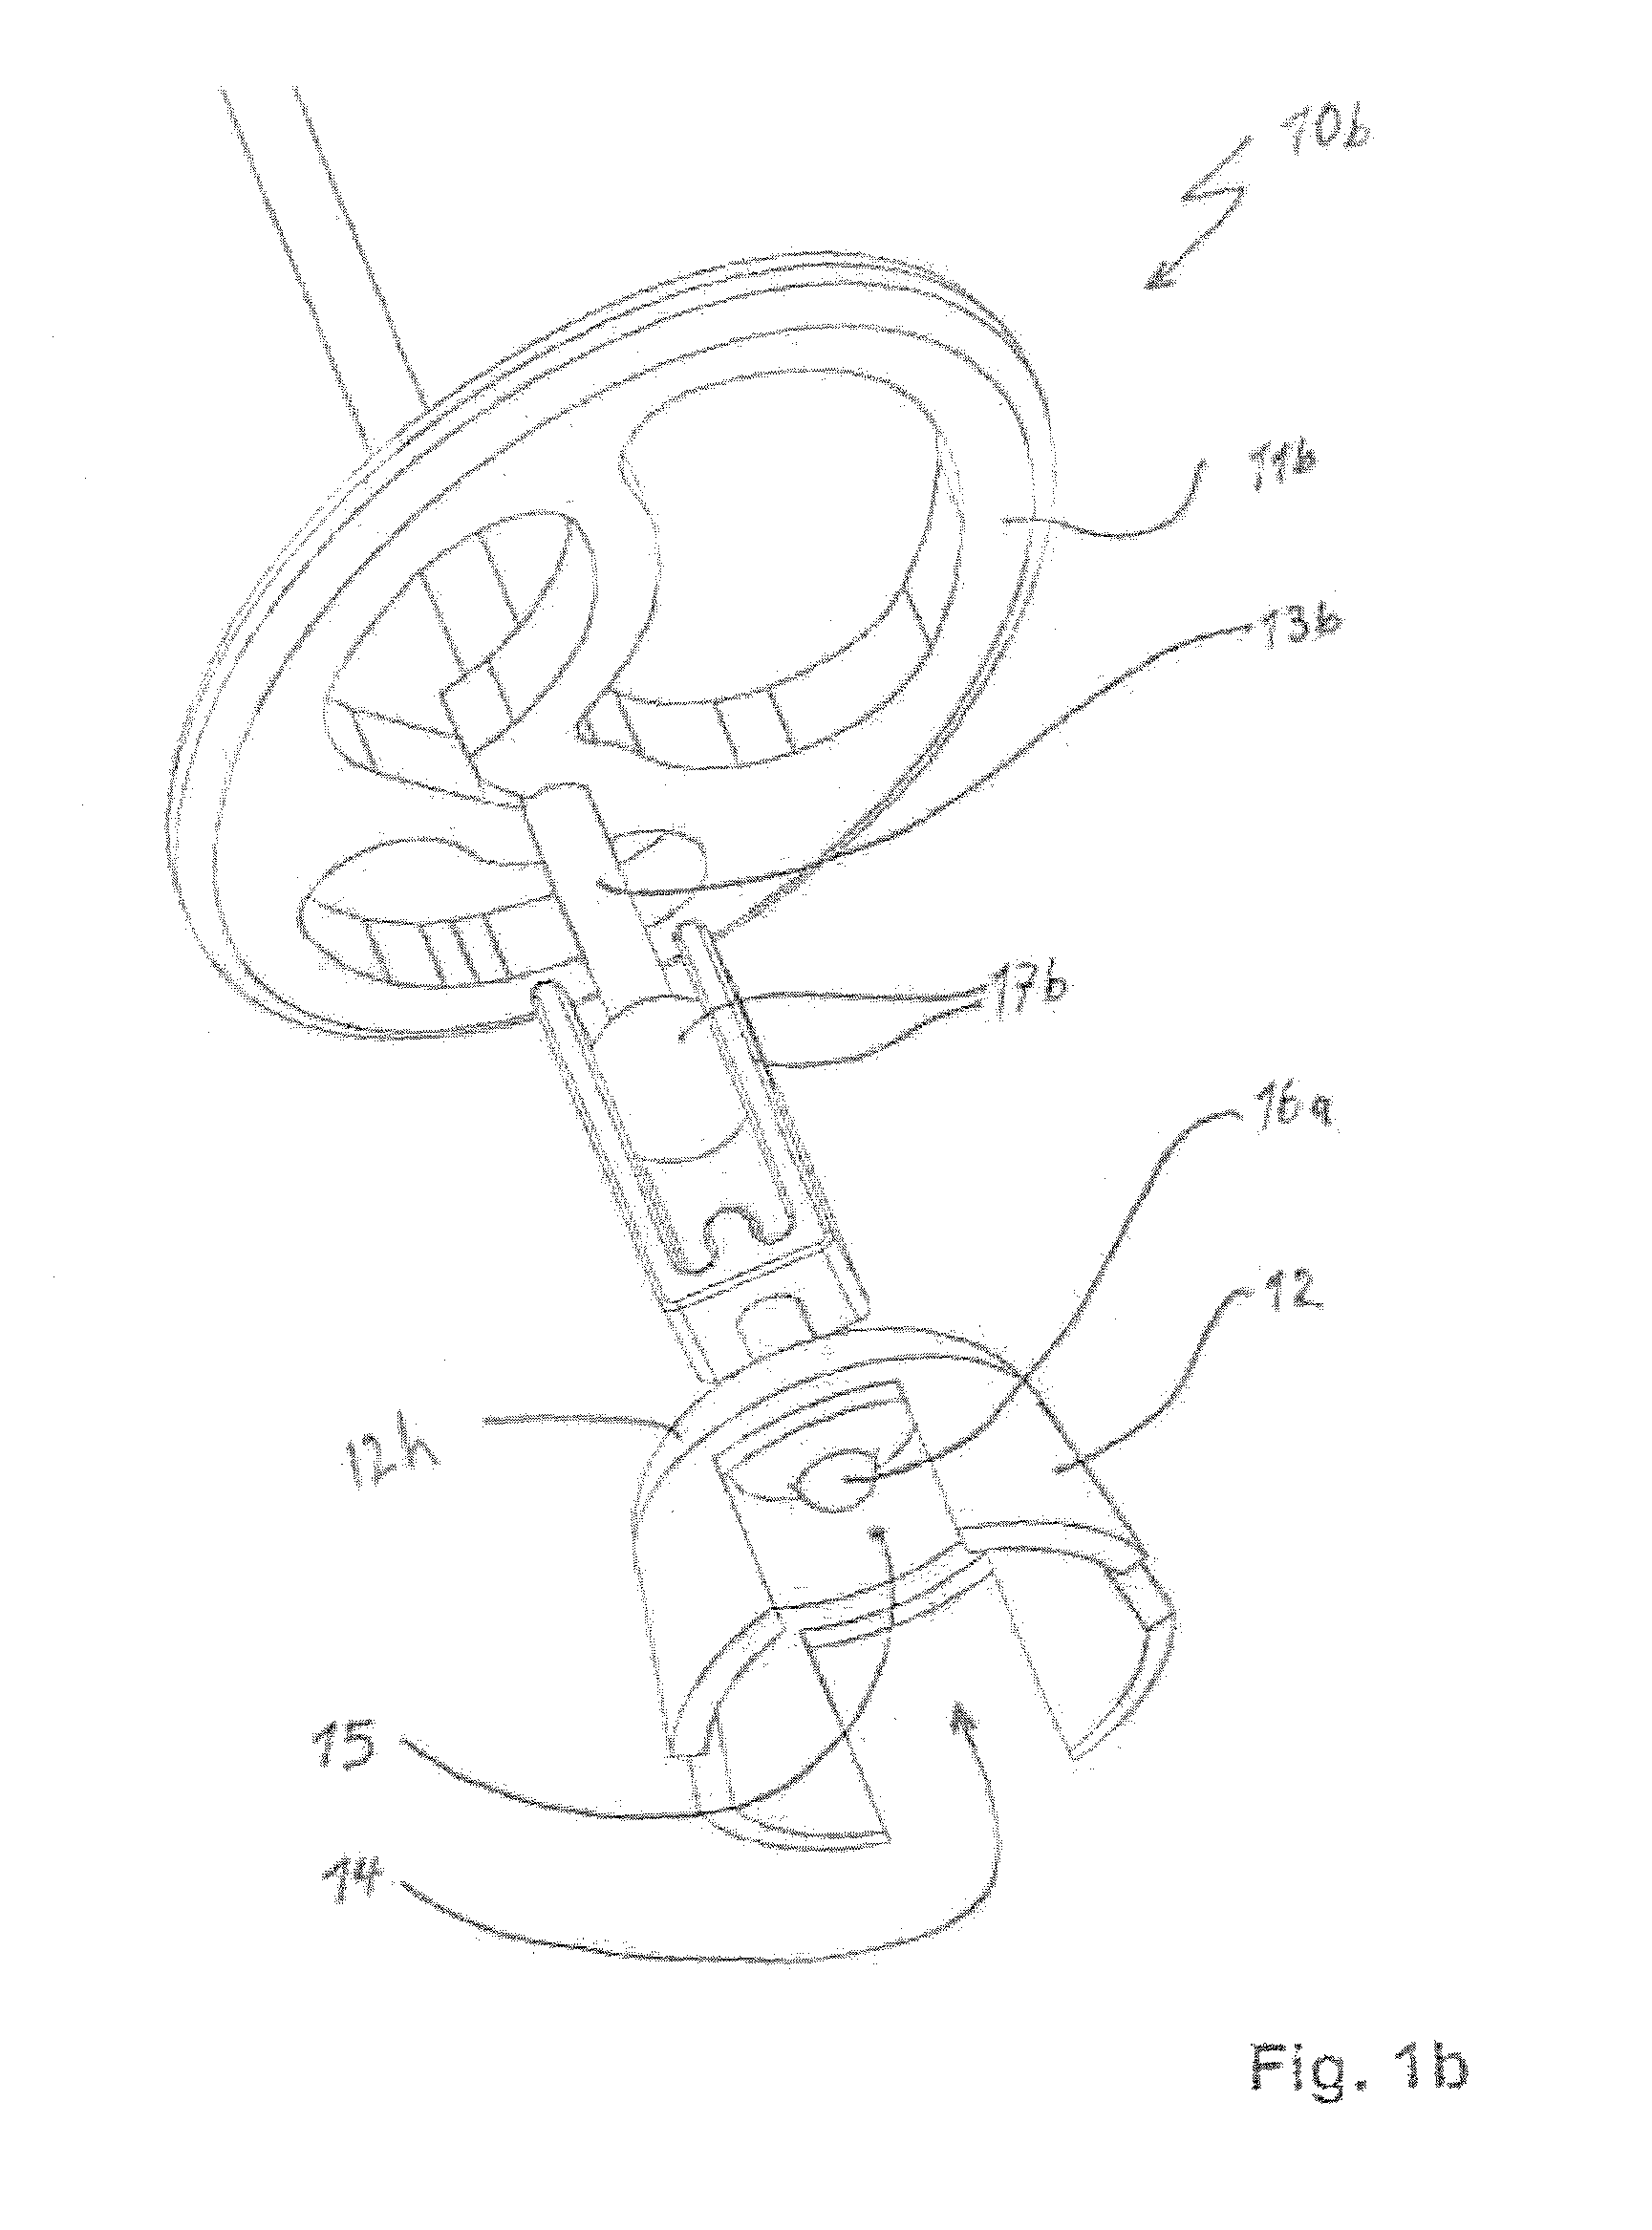 Ossicle prosthesis comprising a built-up attaching element